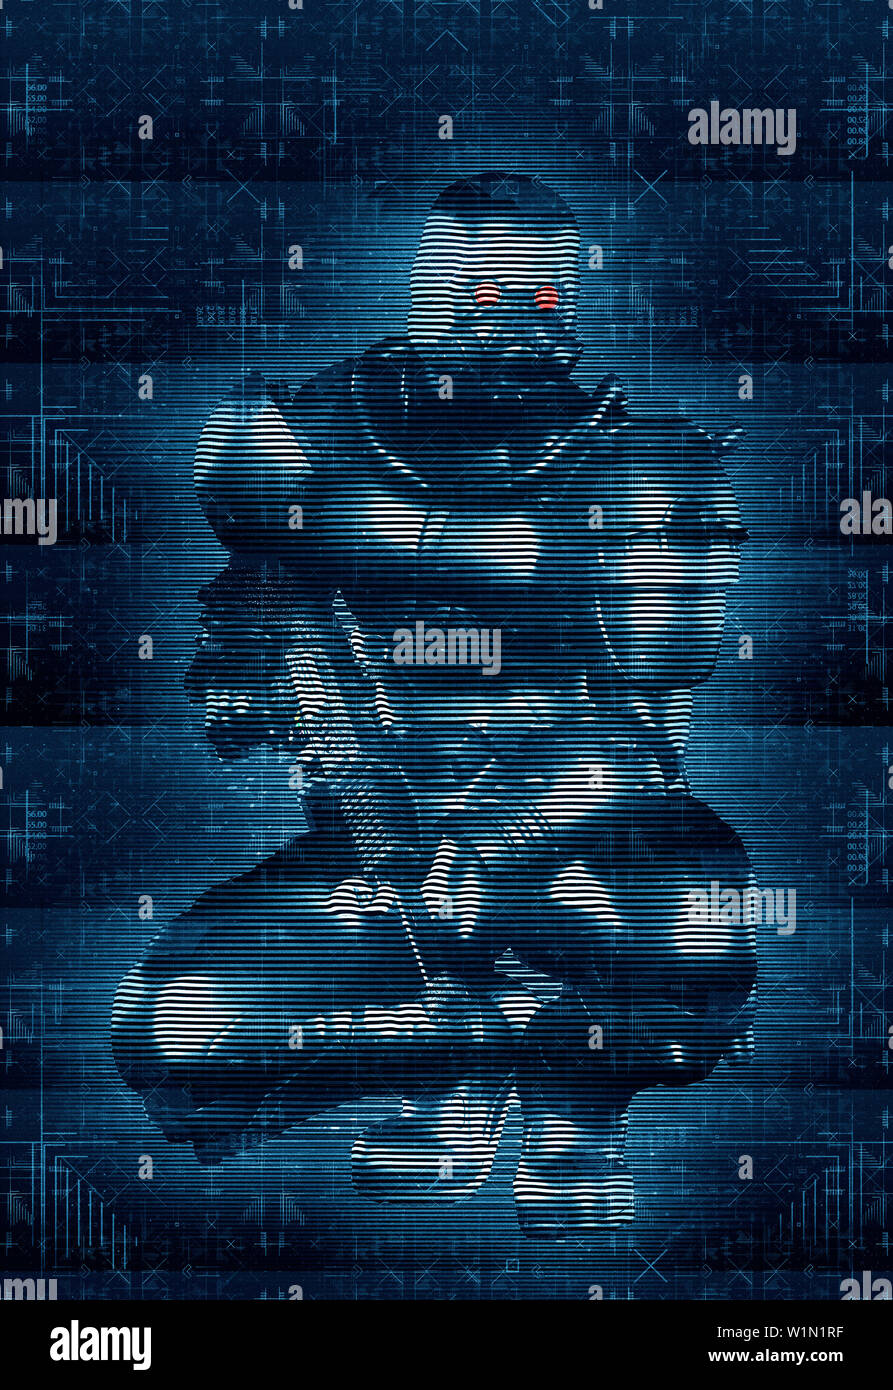 Concept of a soldier in a cyberspace war, holographic image style, 3d render, Stock Photo